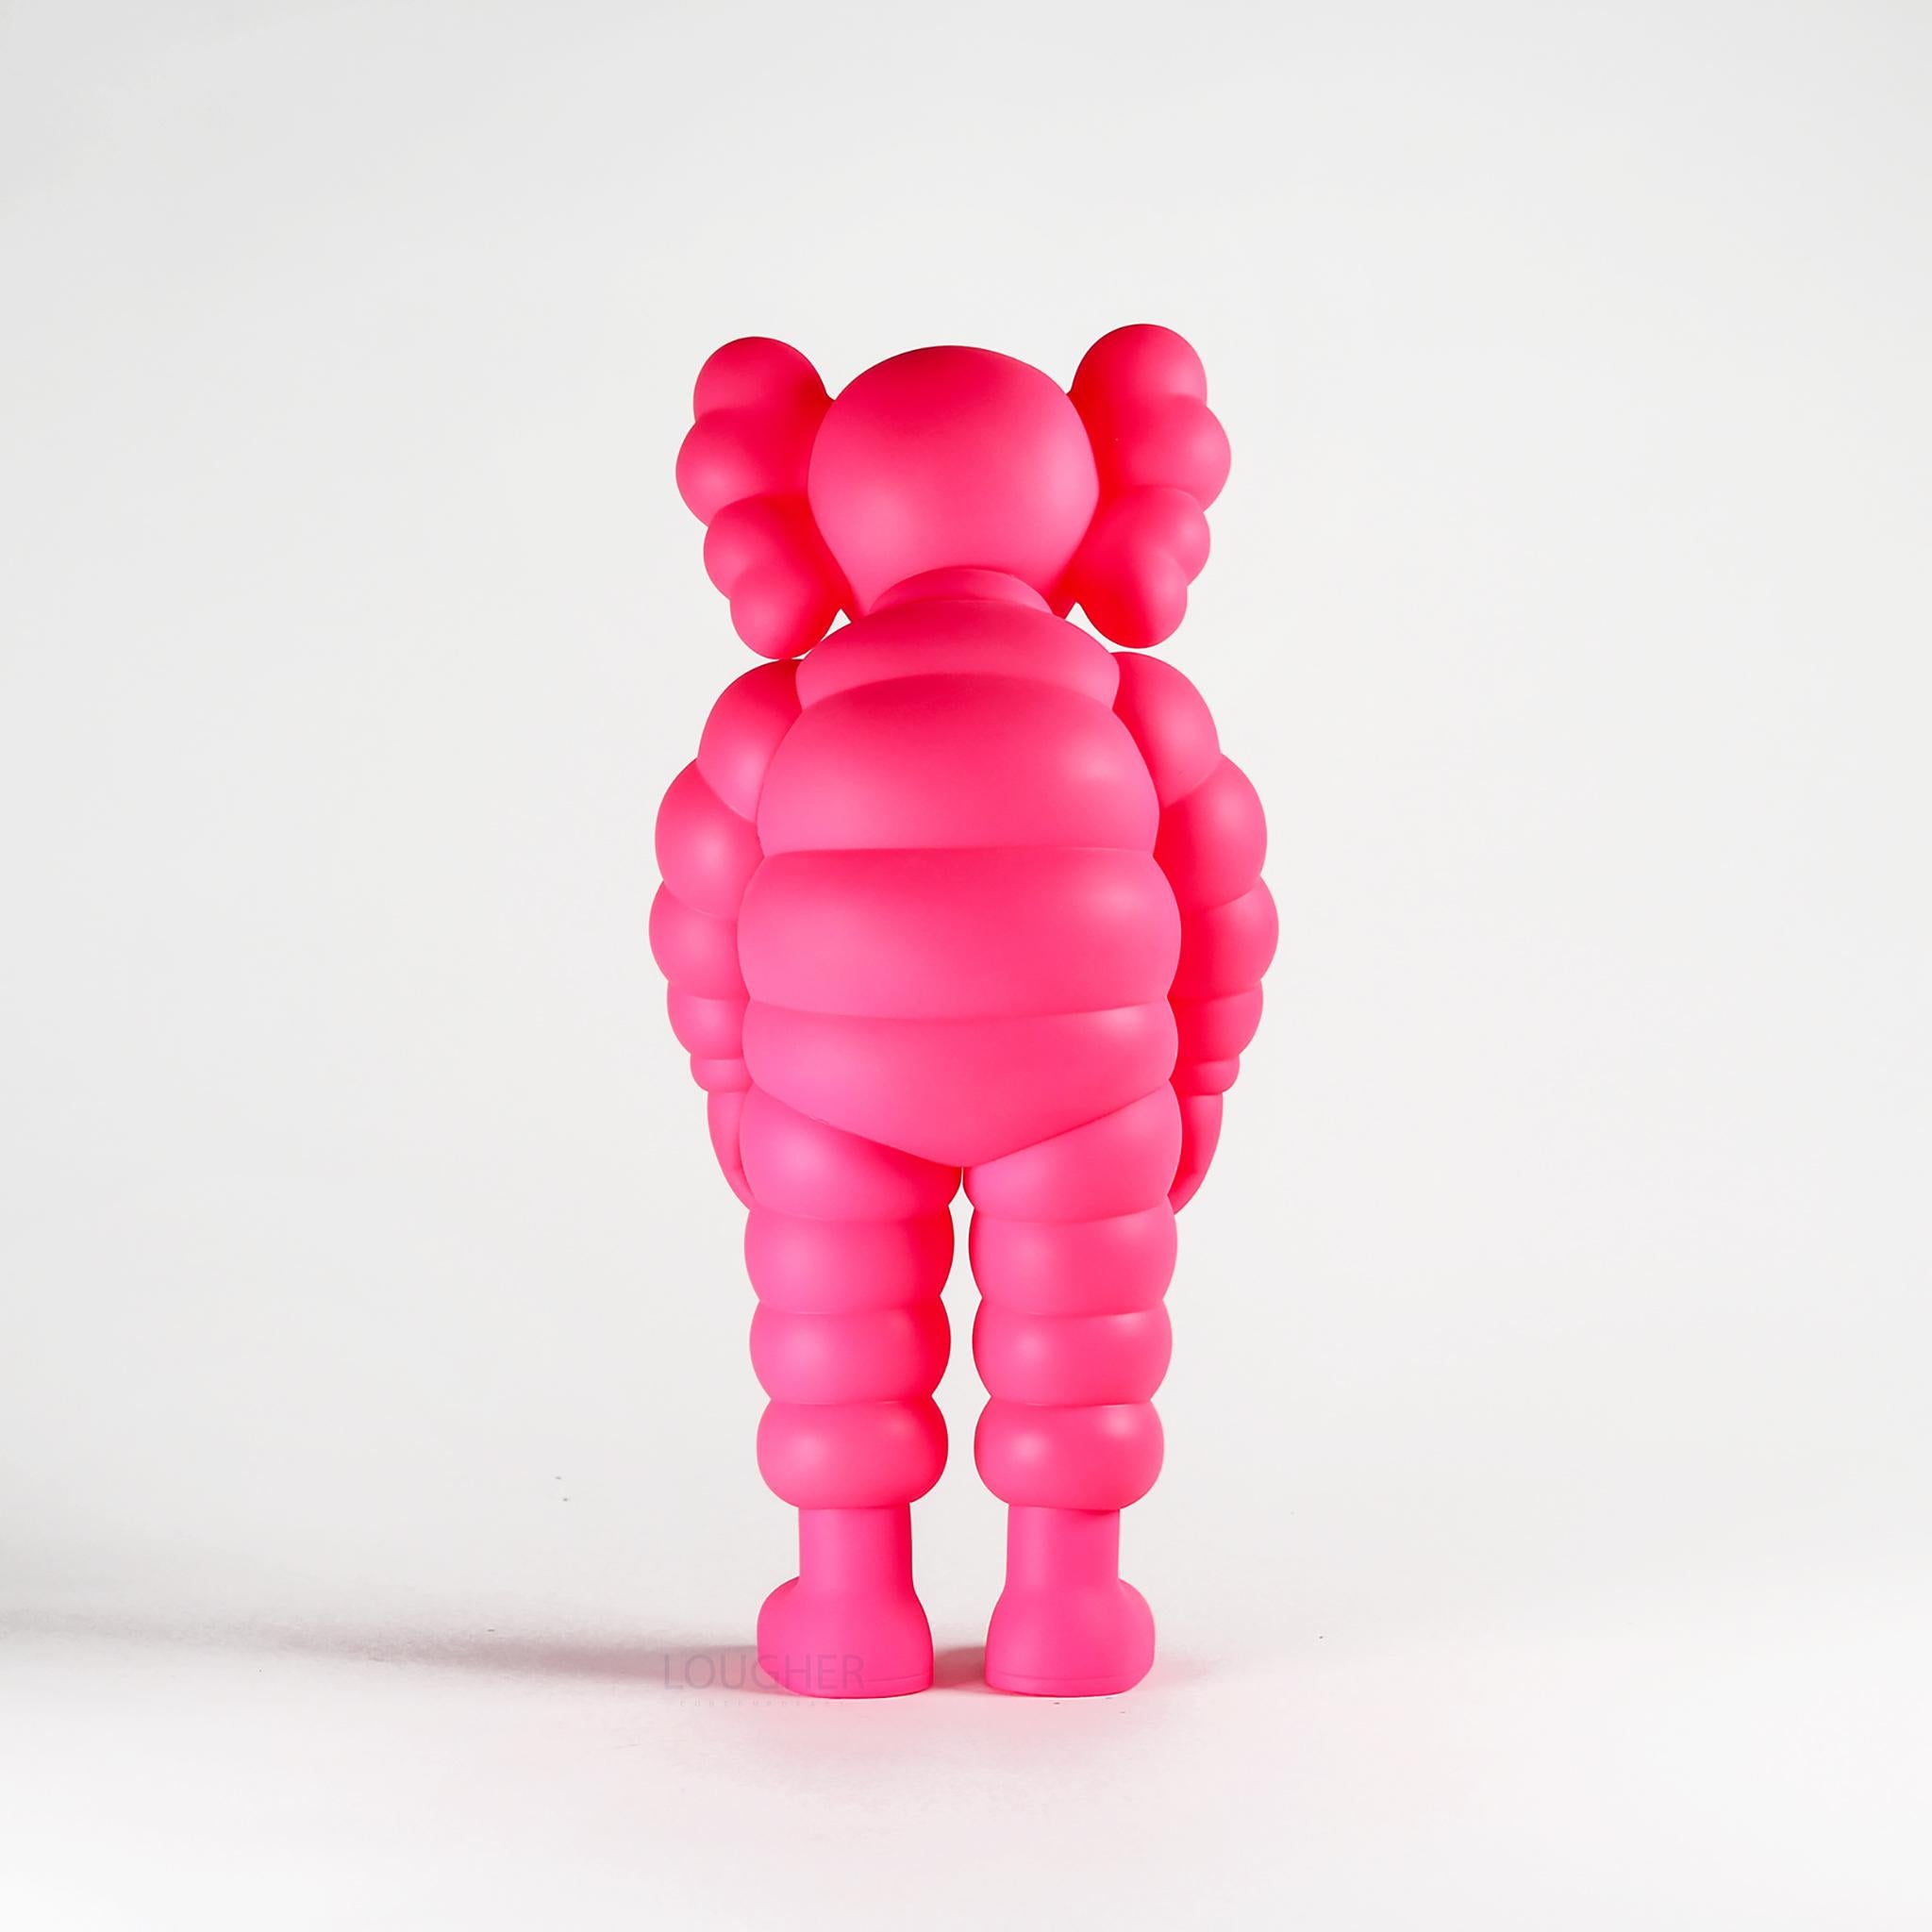 What Party - Chum (Pink) - Sculpture by KAWS